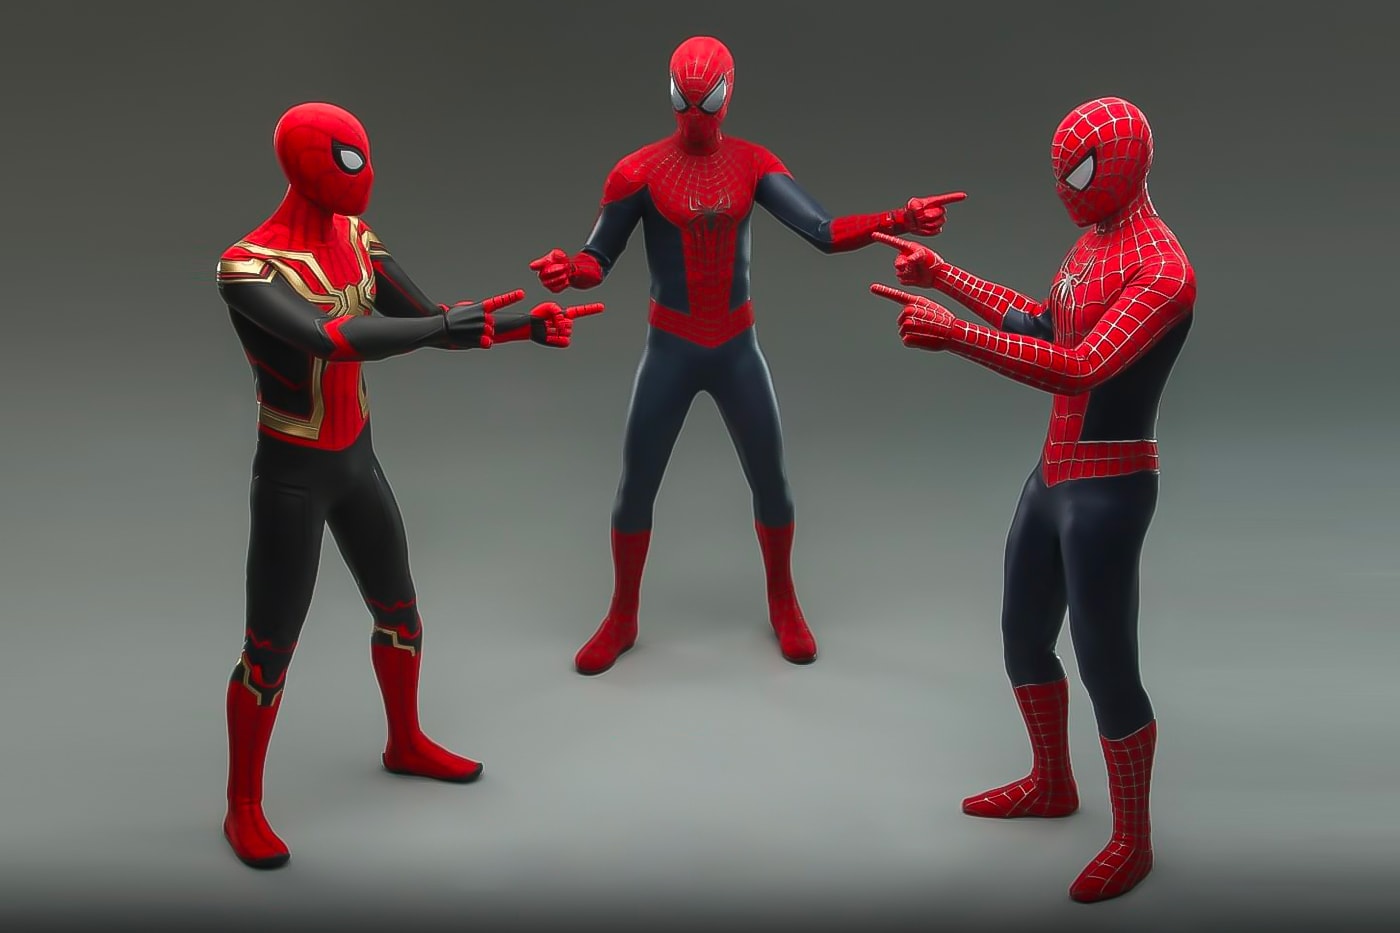 Hot Toys Tom Holland Andrew Garfield Tobey Maguire Spider-Man: No Way Home Figures Teaser